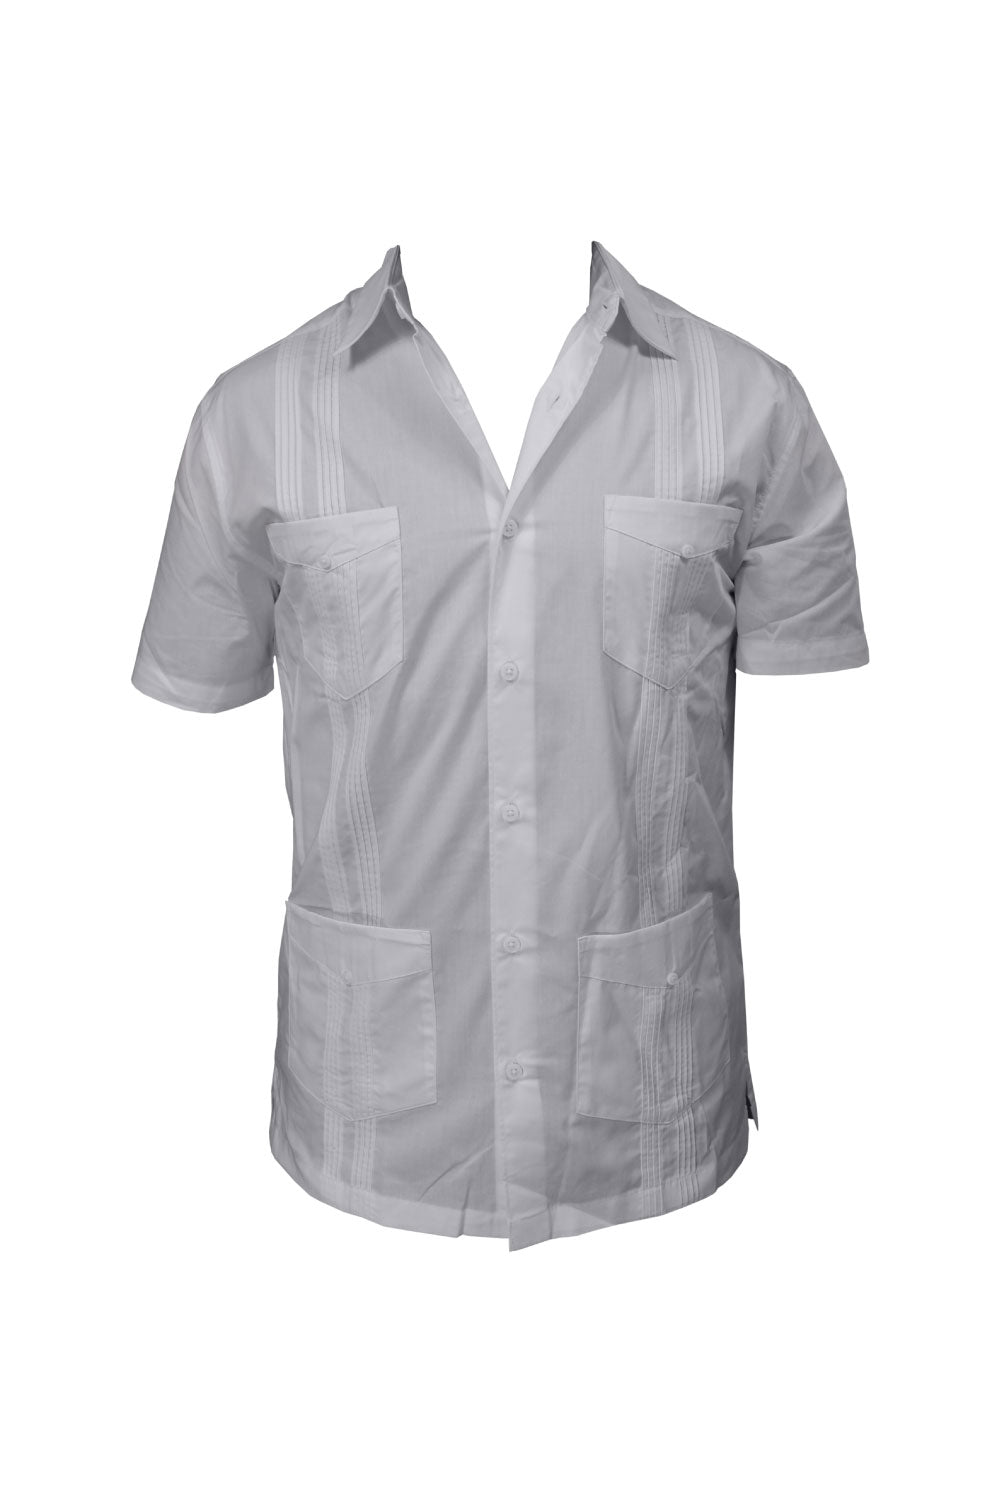 Image of the front of the White Cuban Style Men's Button-up.